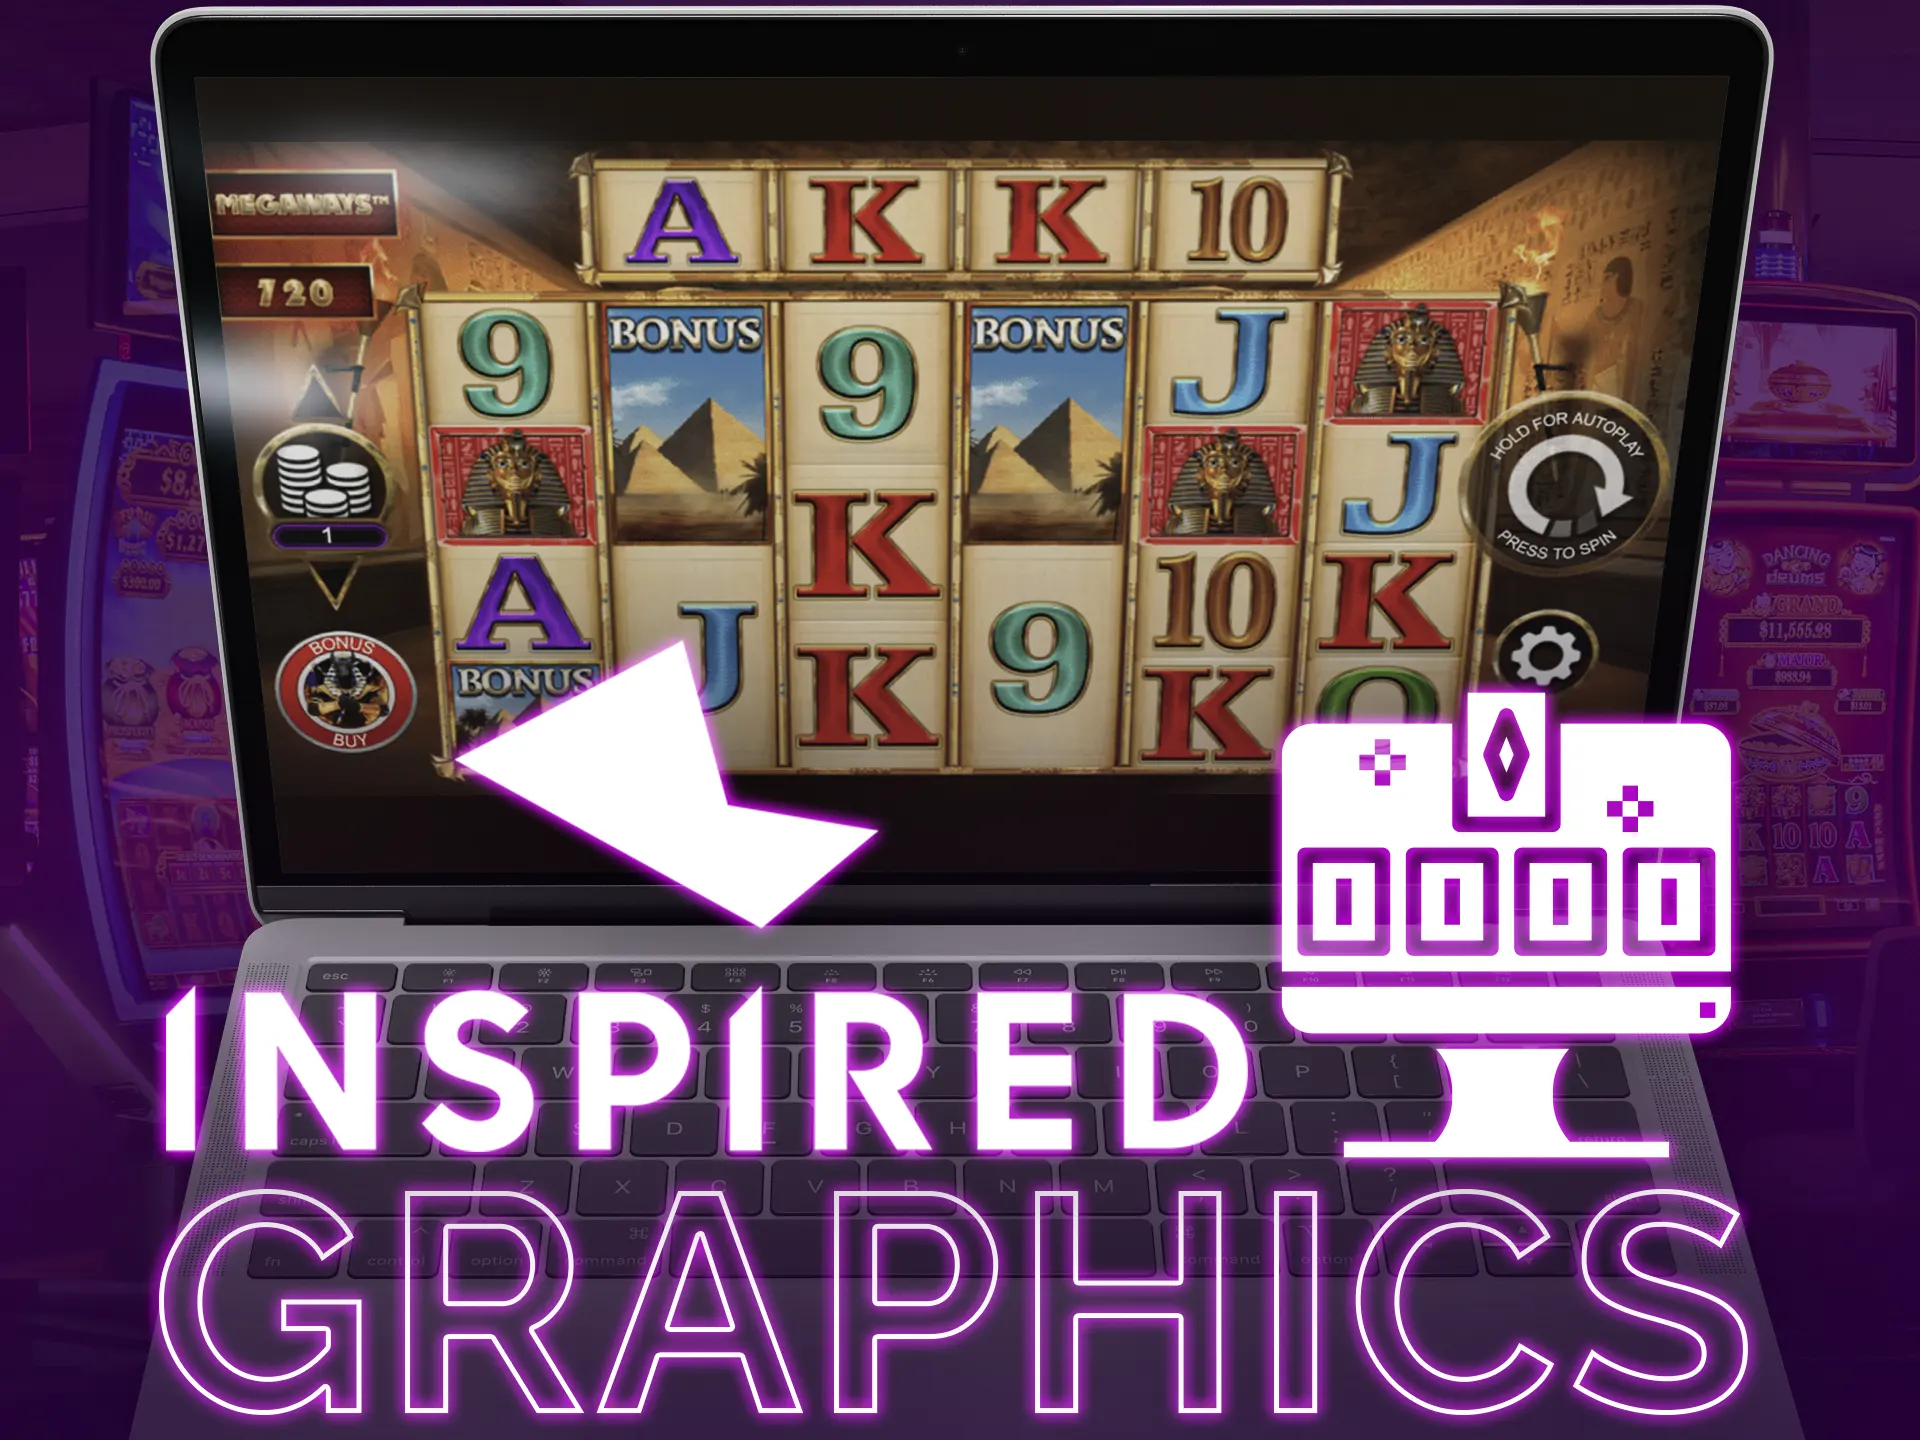 Inspired Gaming focuses on vivid 3D graphics and animations.